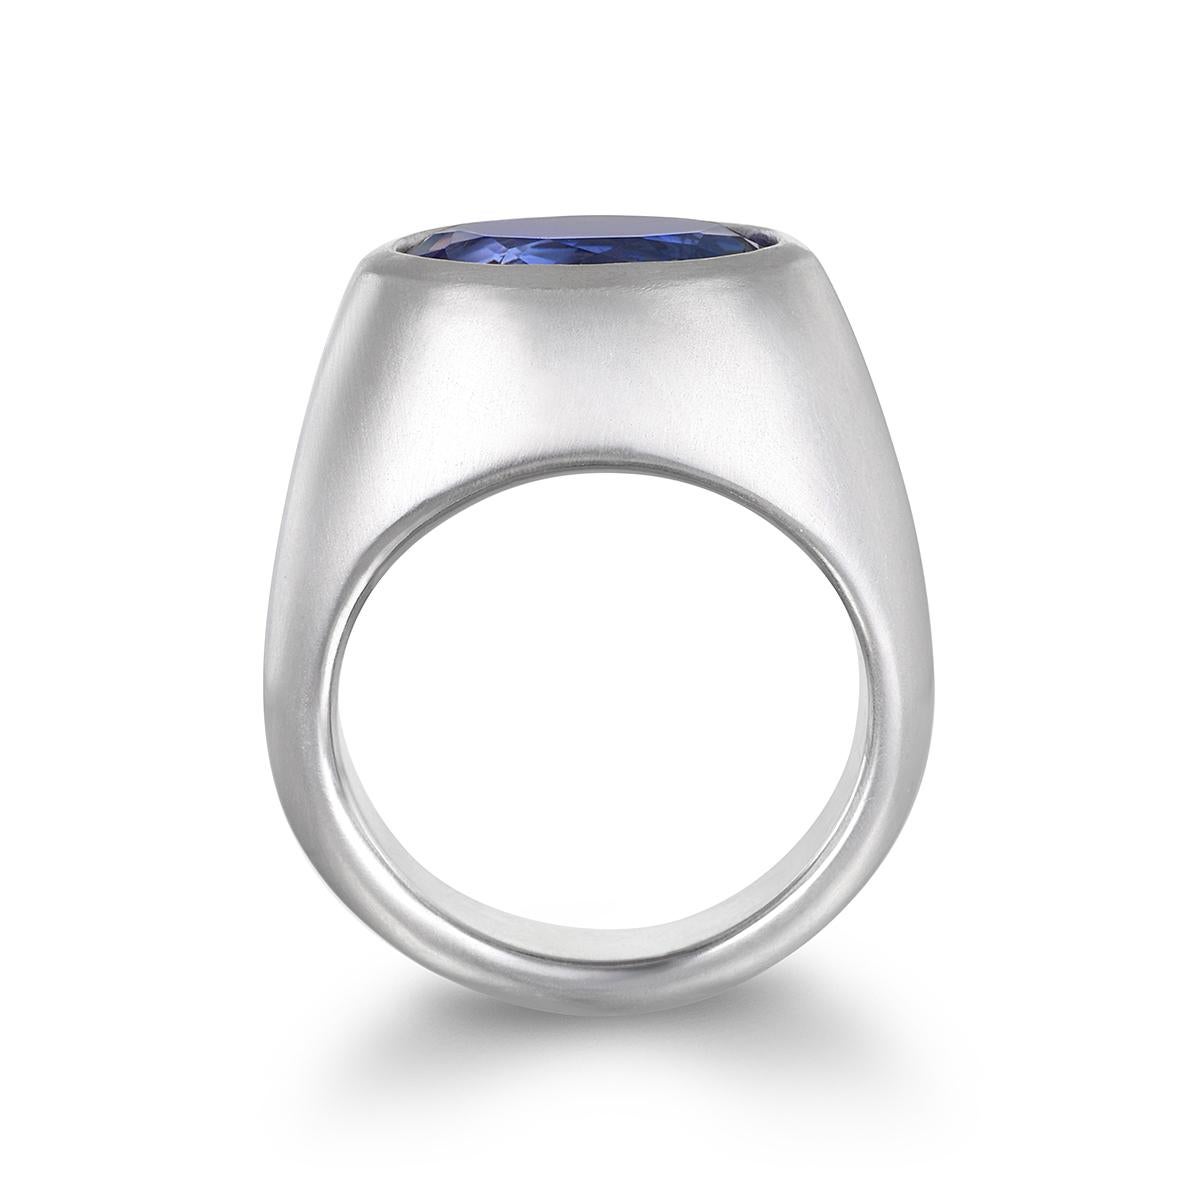 Faye Kim's Platinum Faceted Oval Tanzanite Dome Ring, with its clean, understated design and smooth, polished matte finish, showcases a stunning Tanzanite stone. The ring's slightly chunky and effortlessly chic style enables it to be incorporated